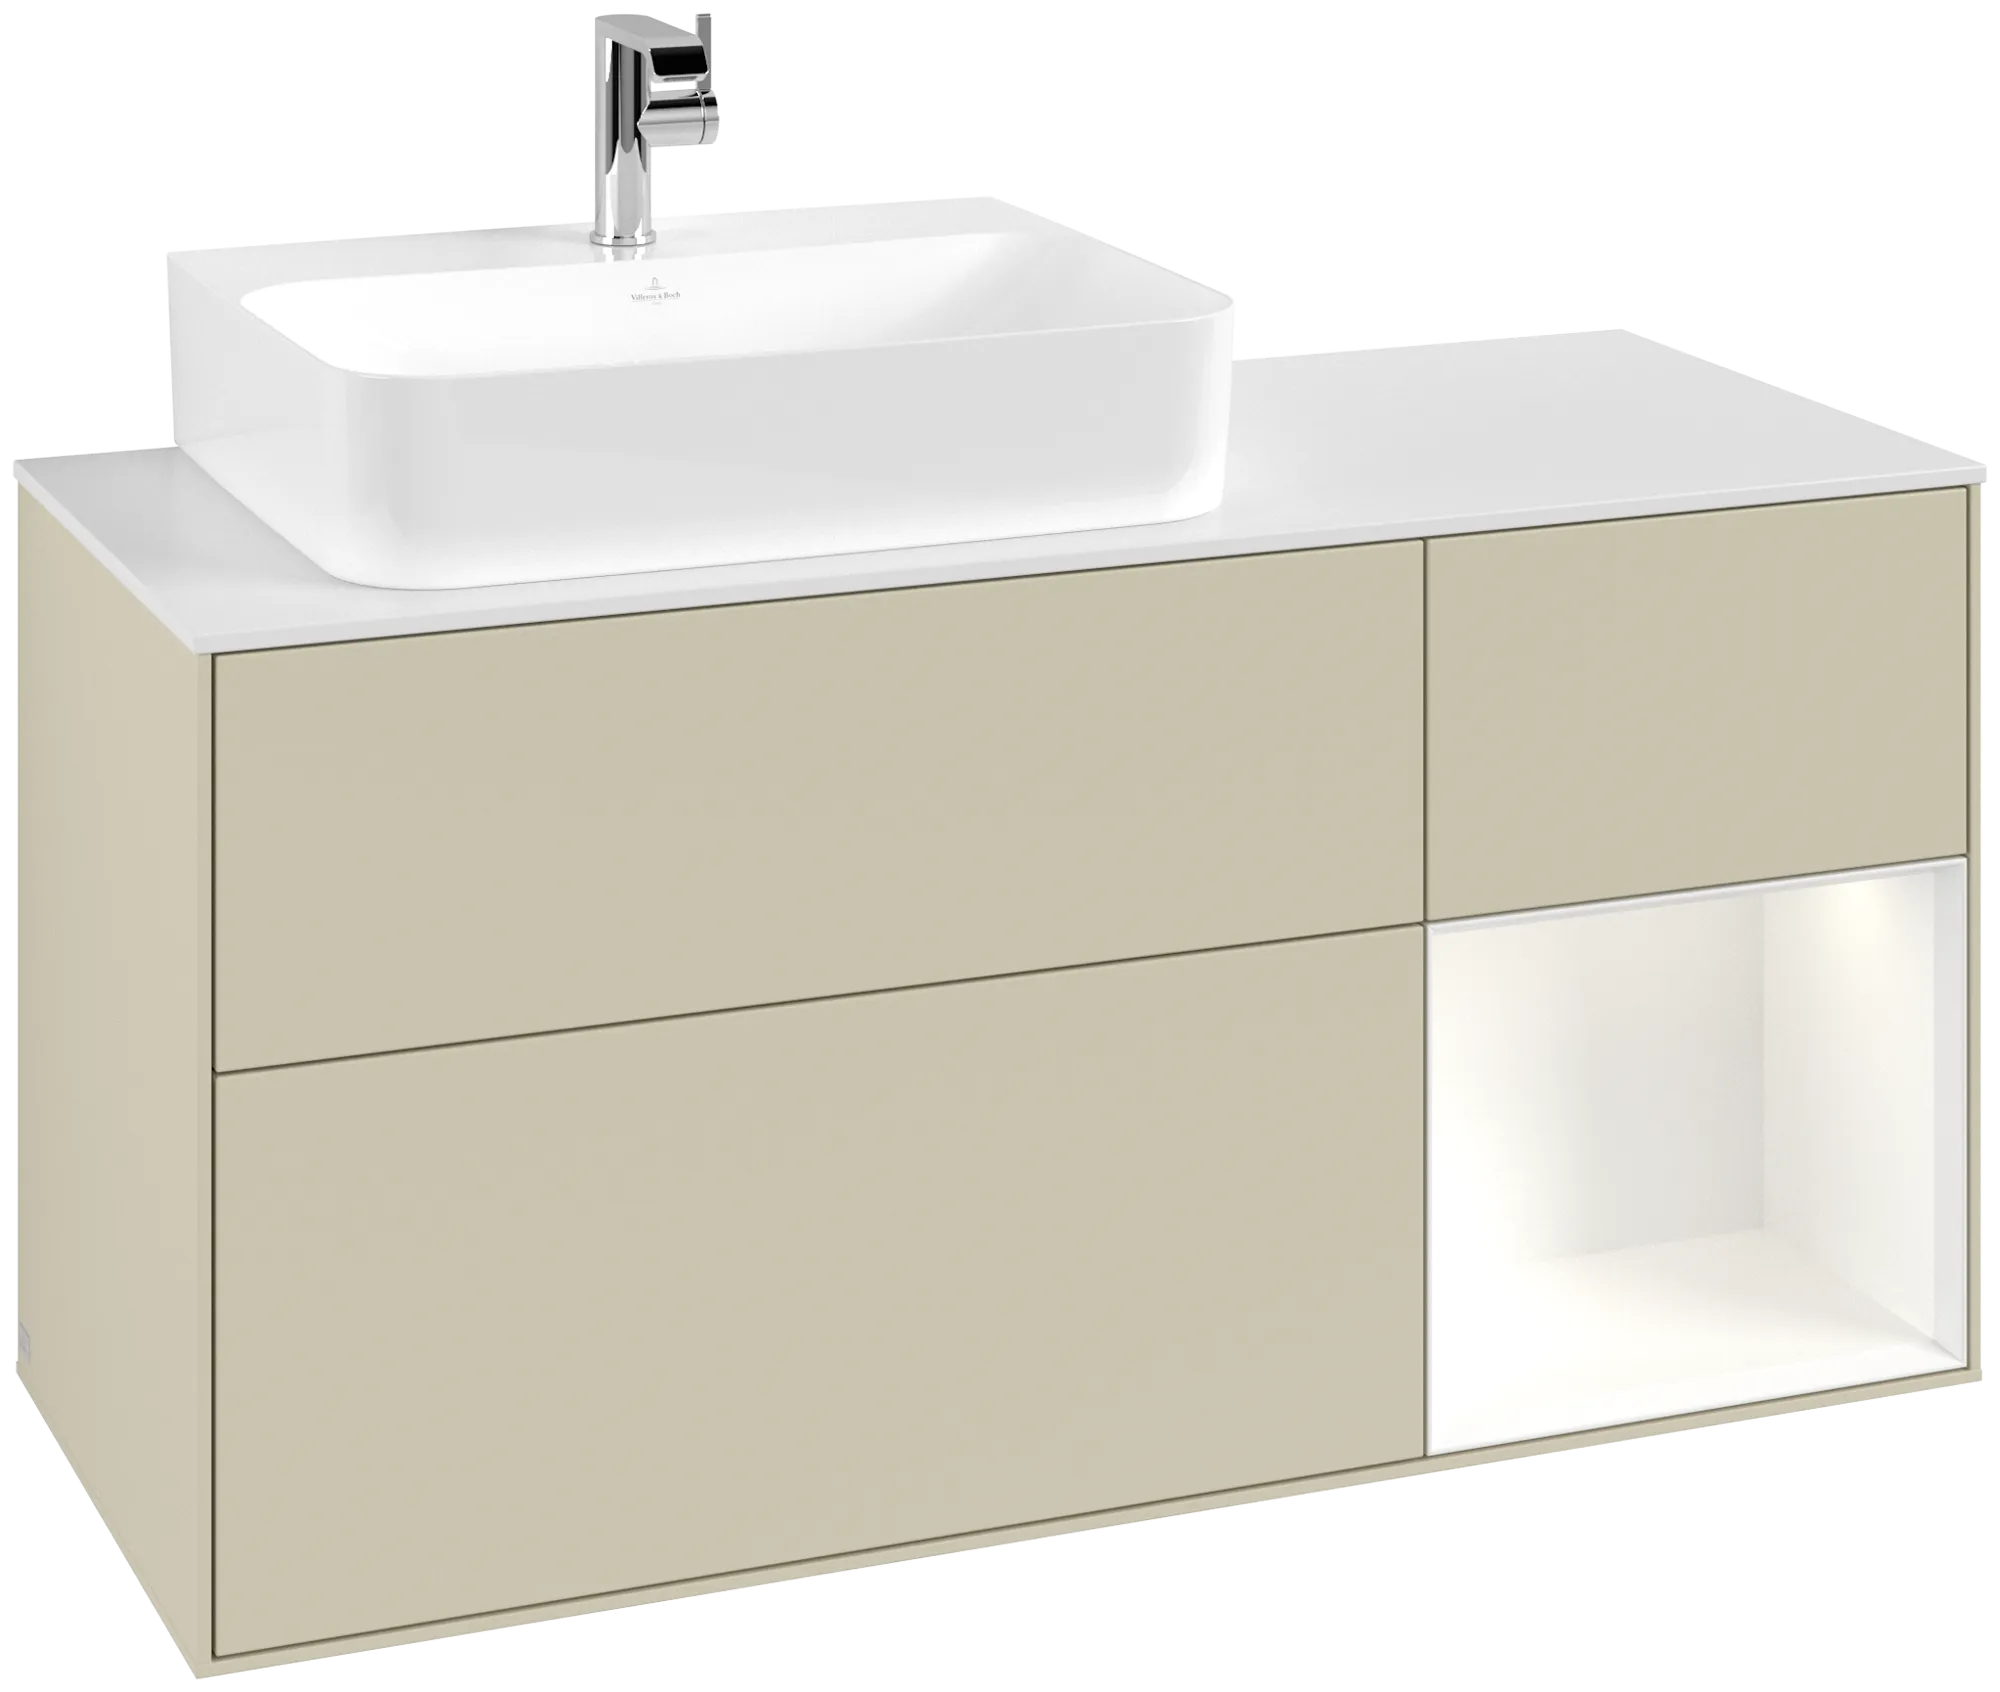 VILLEROY BOCH Finion Vanity unit, with lighting, 3 pull-out compartments, 1200 x 603 x 501 mm, Silk Grey Matt Lacquer / White Matt Lacquer / Glass White Matt #G151MTHJ resmi